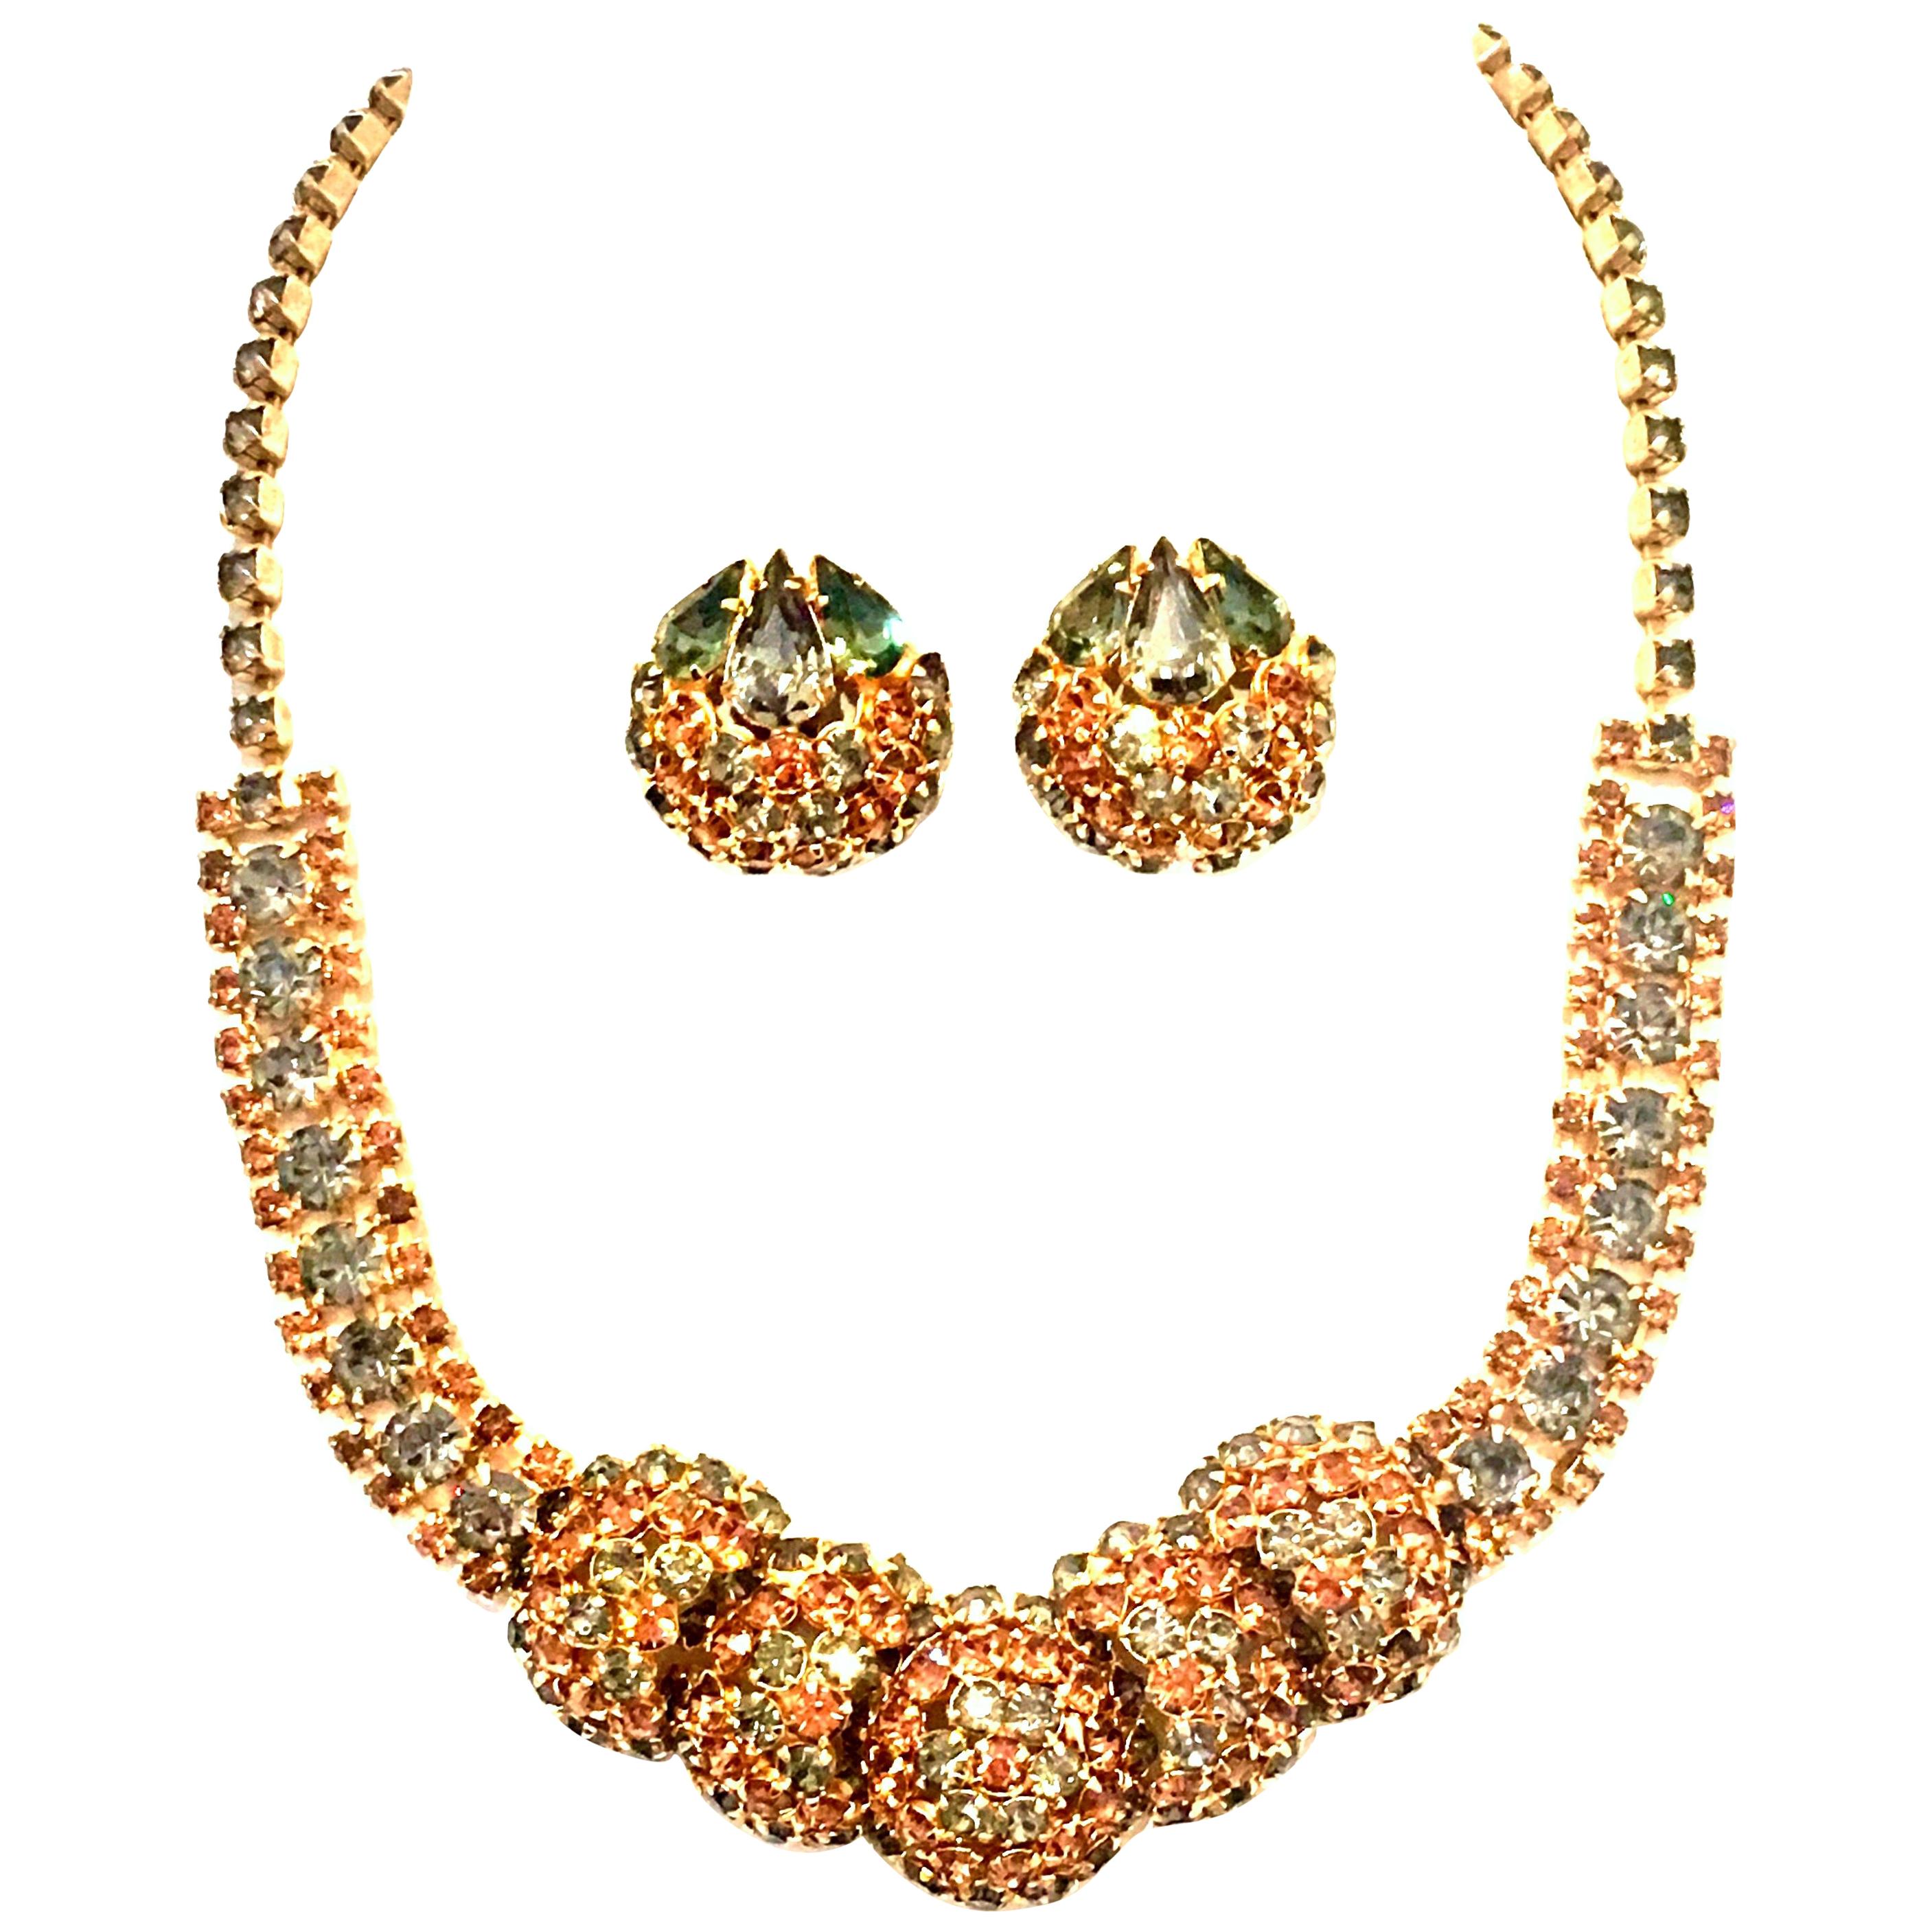 1950'S Gold & Swarovski Crystal Necklace And Earrings By Joseph Warner S/3